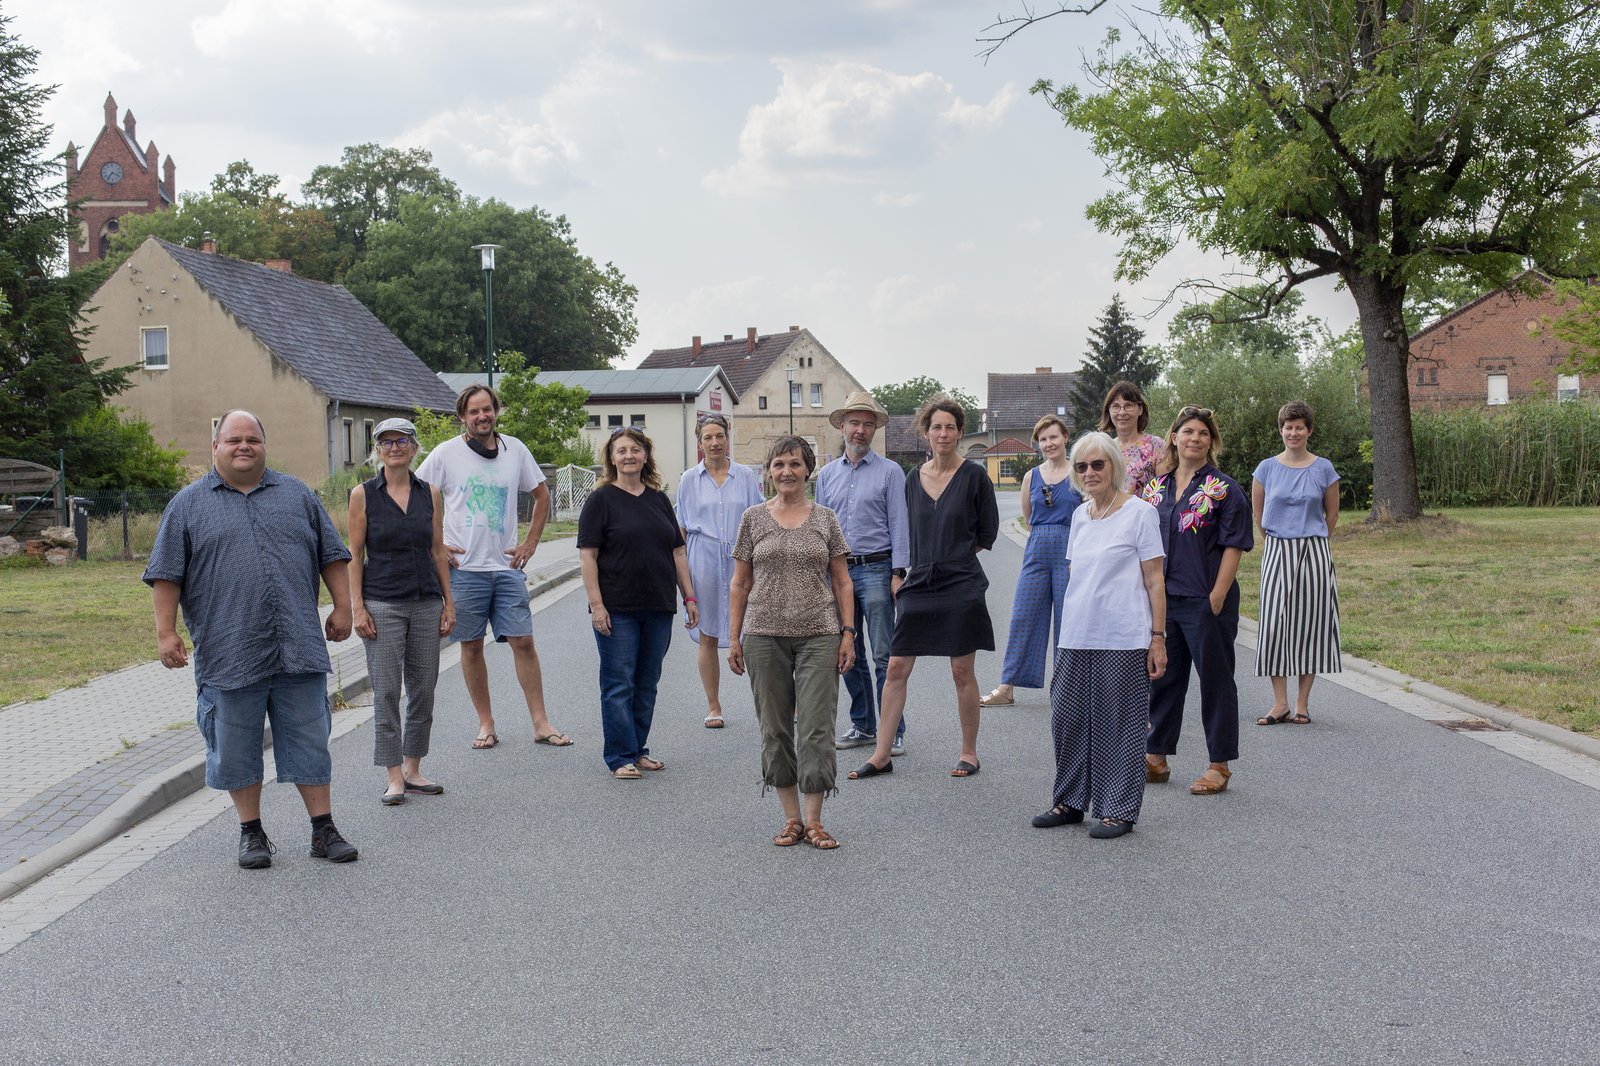 People standing on a street in village facing the observer